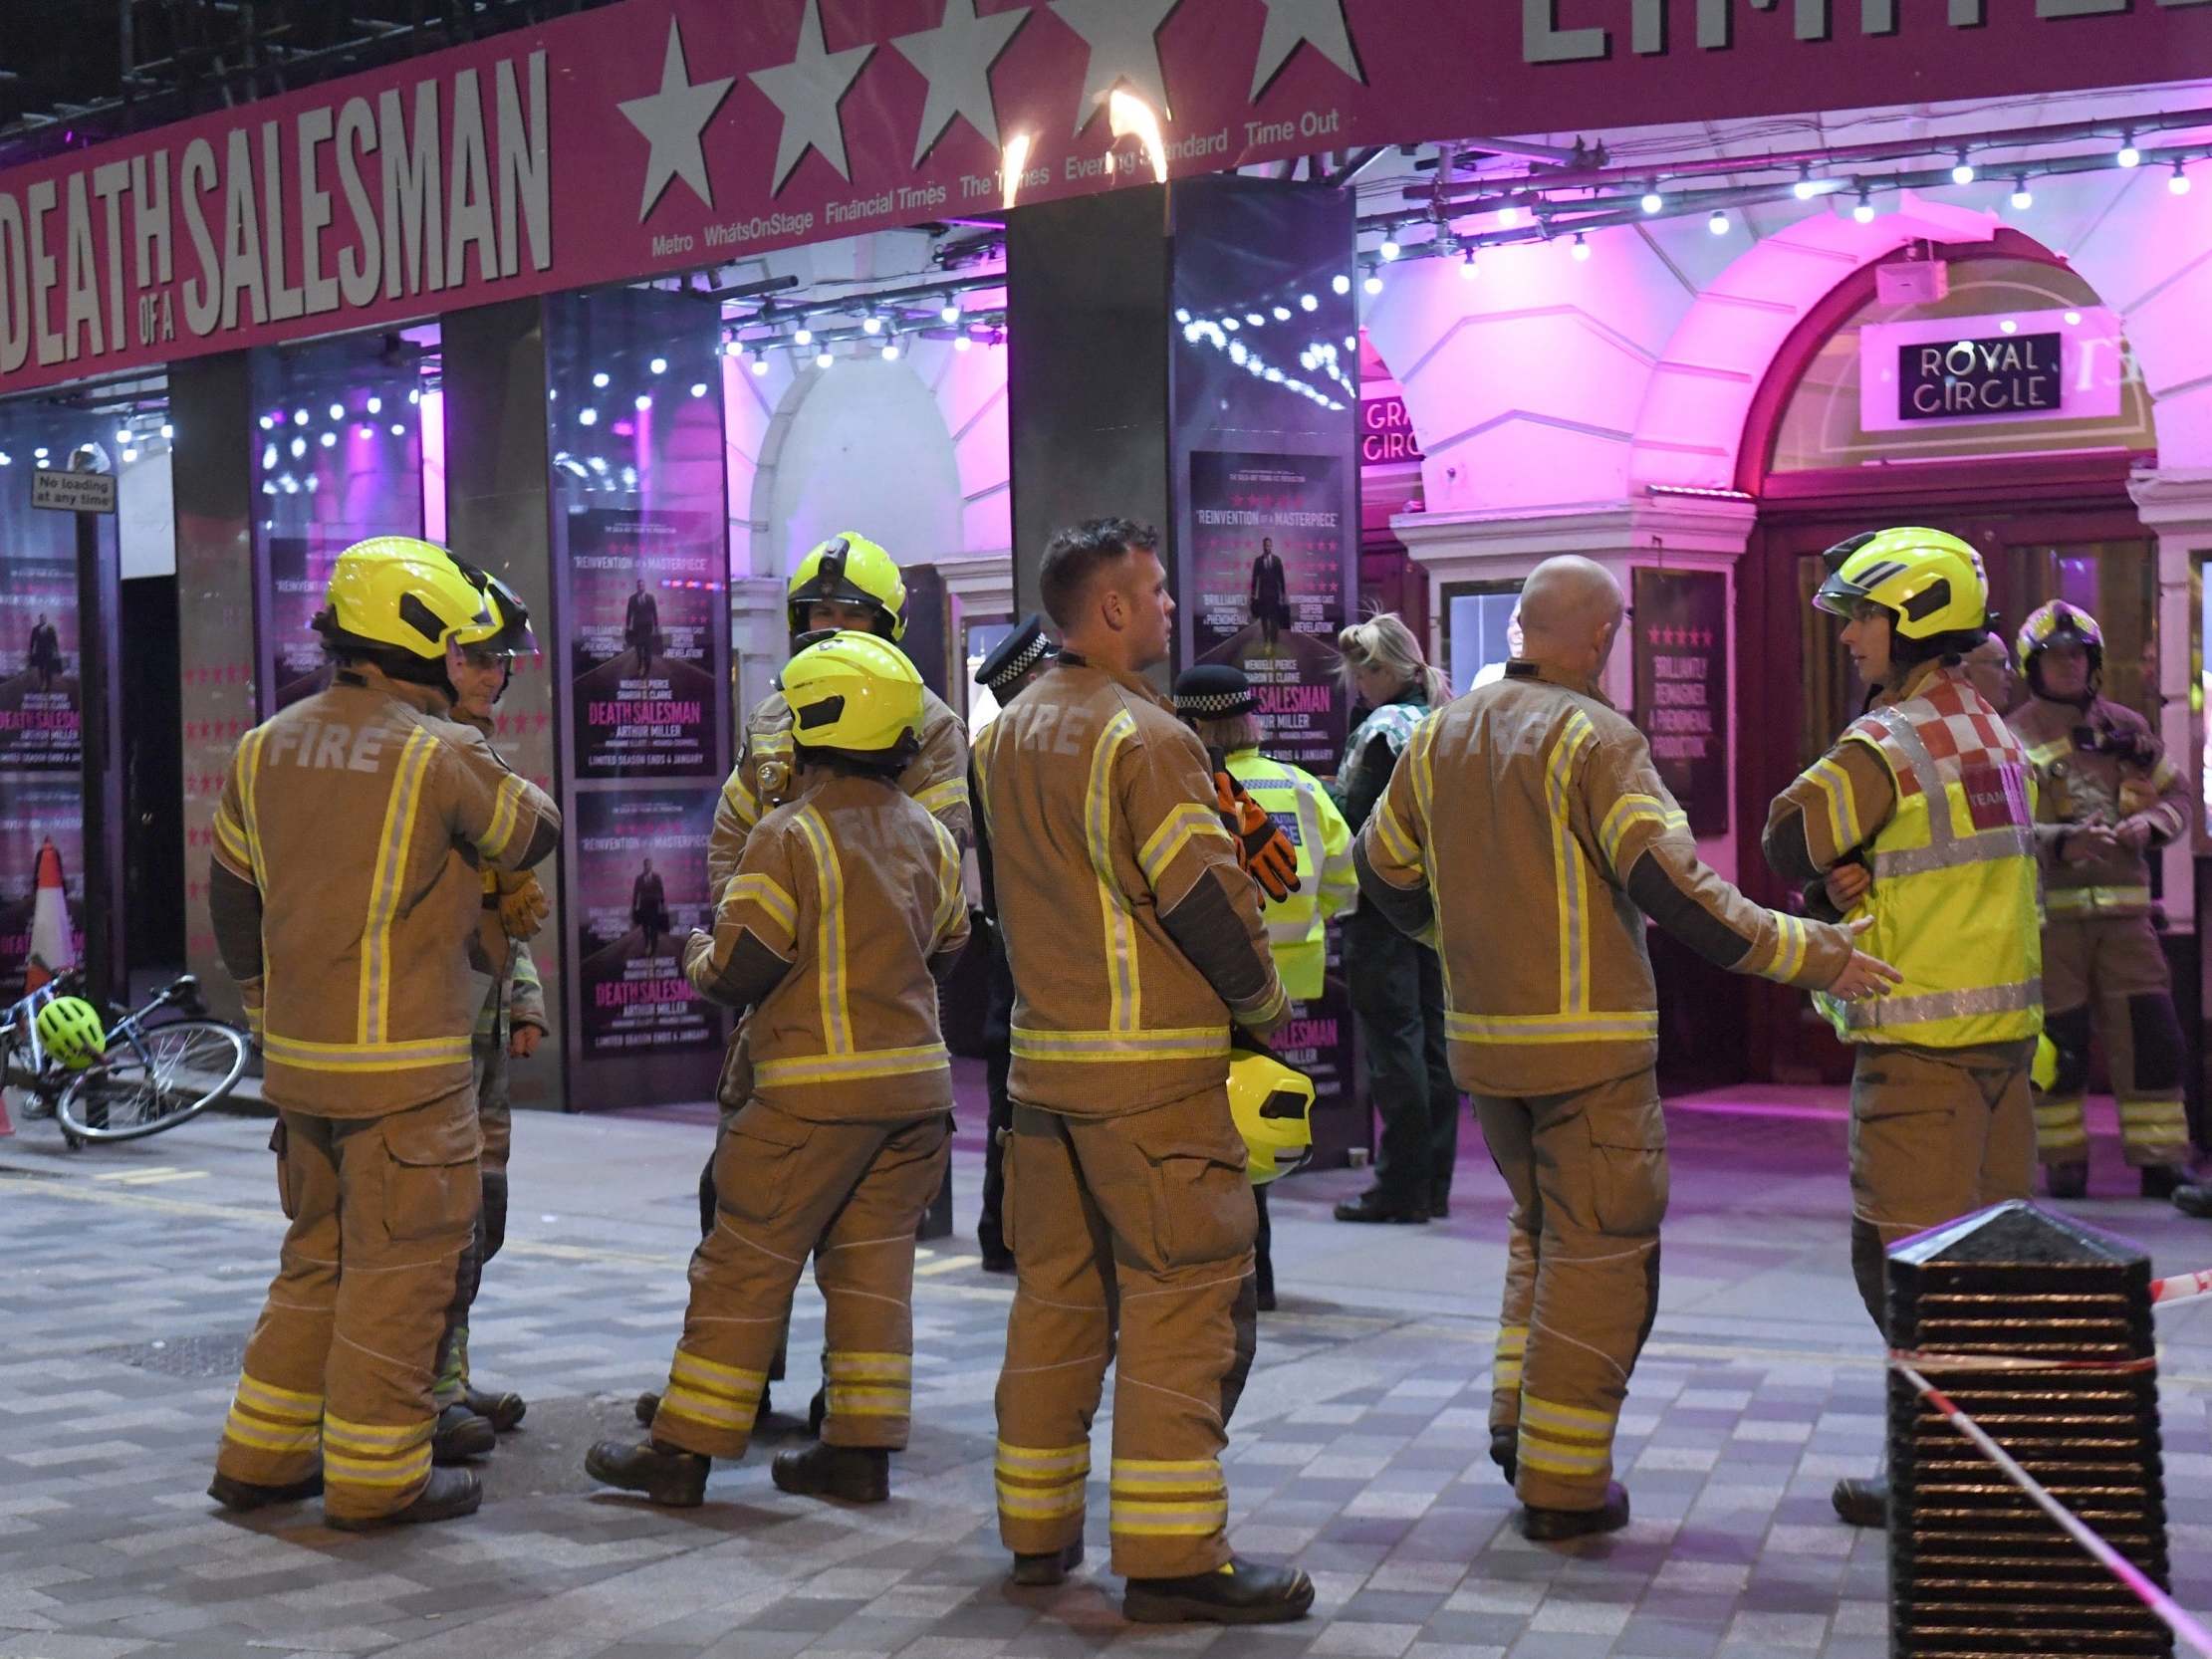 Piccadilly Theatre Ceiling Collapses And Injures Audience In